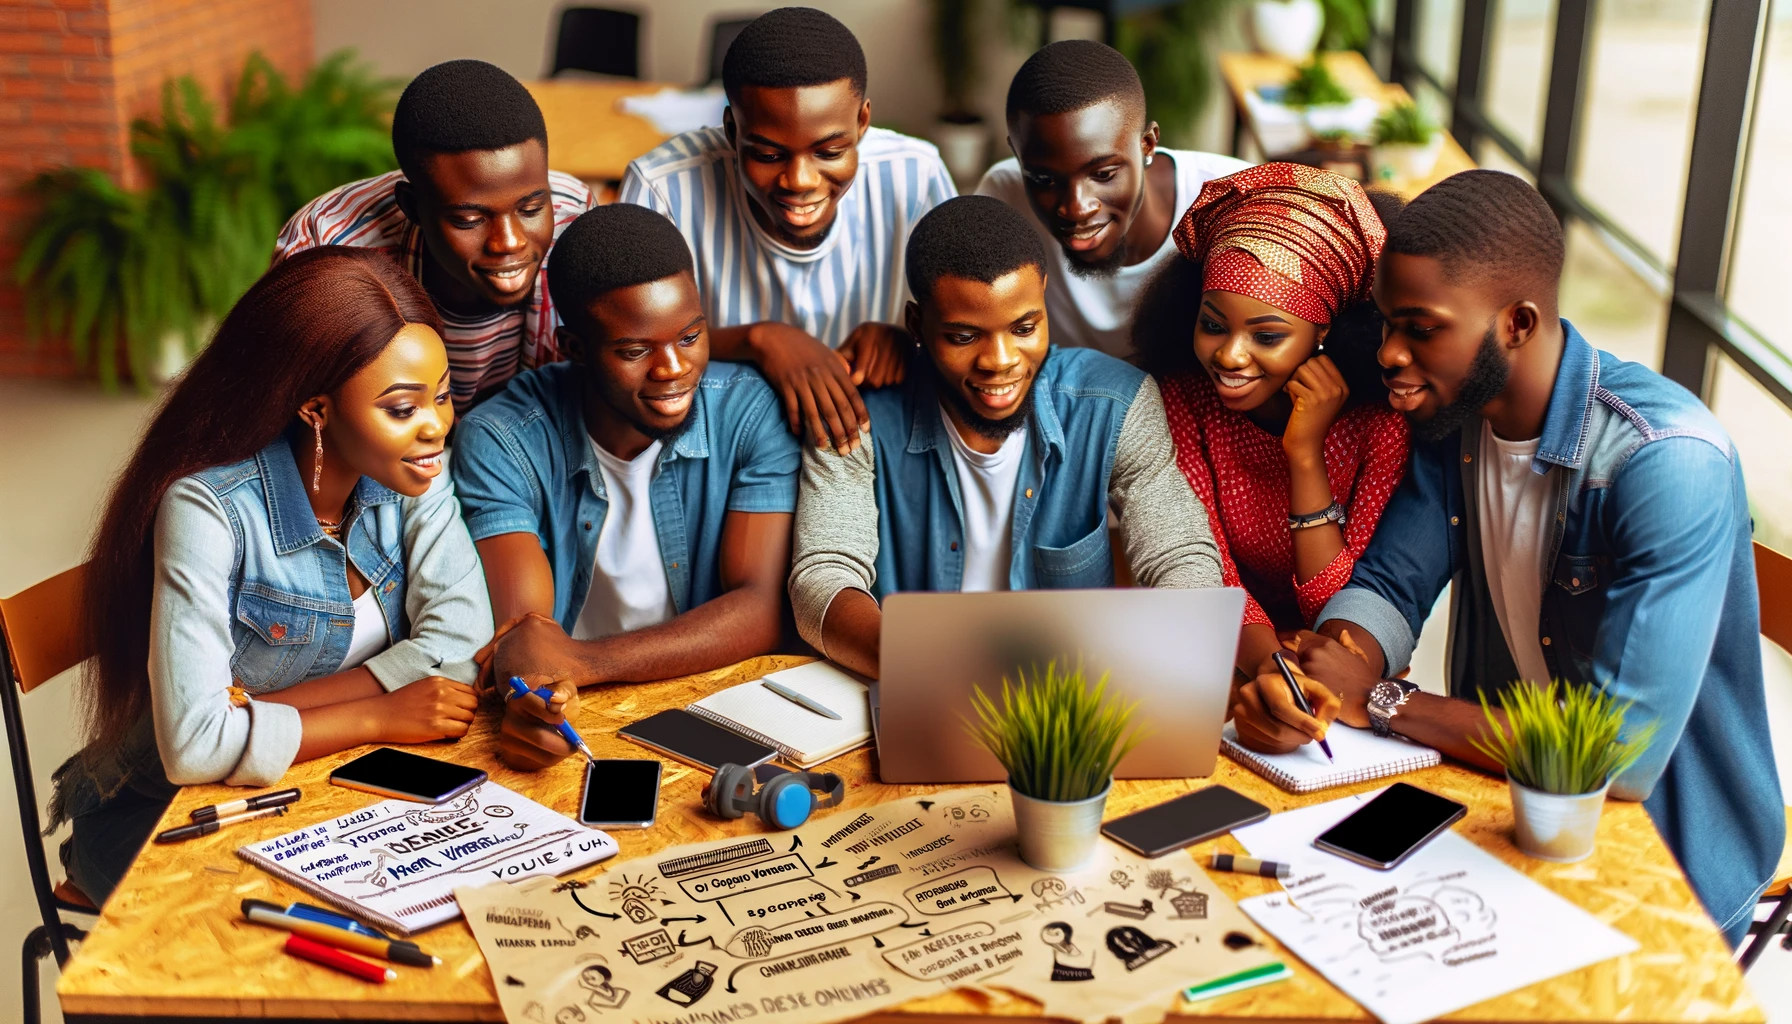 How to Make Money Online in Nigeria as a Student: 7 Top Strategies Revealed!